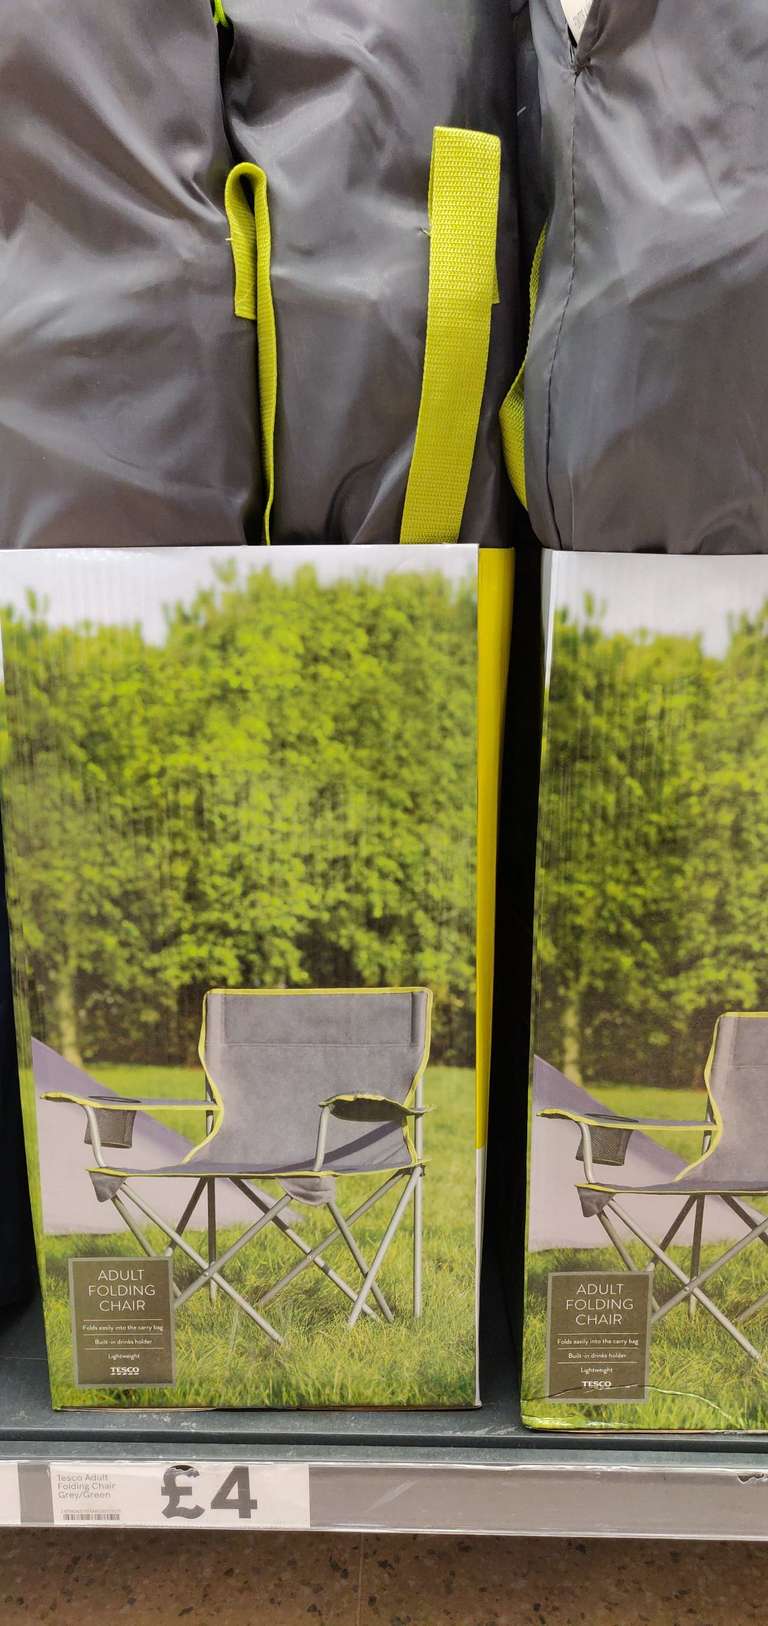 Camping Chairs £4 at Tesco Ashford Middlesex